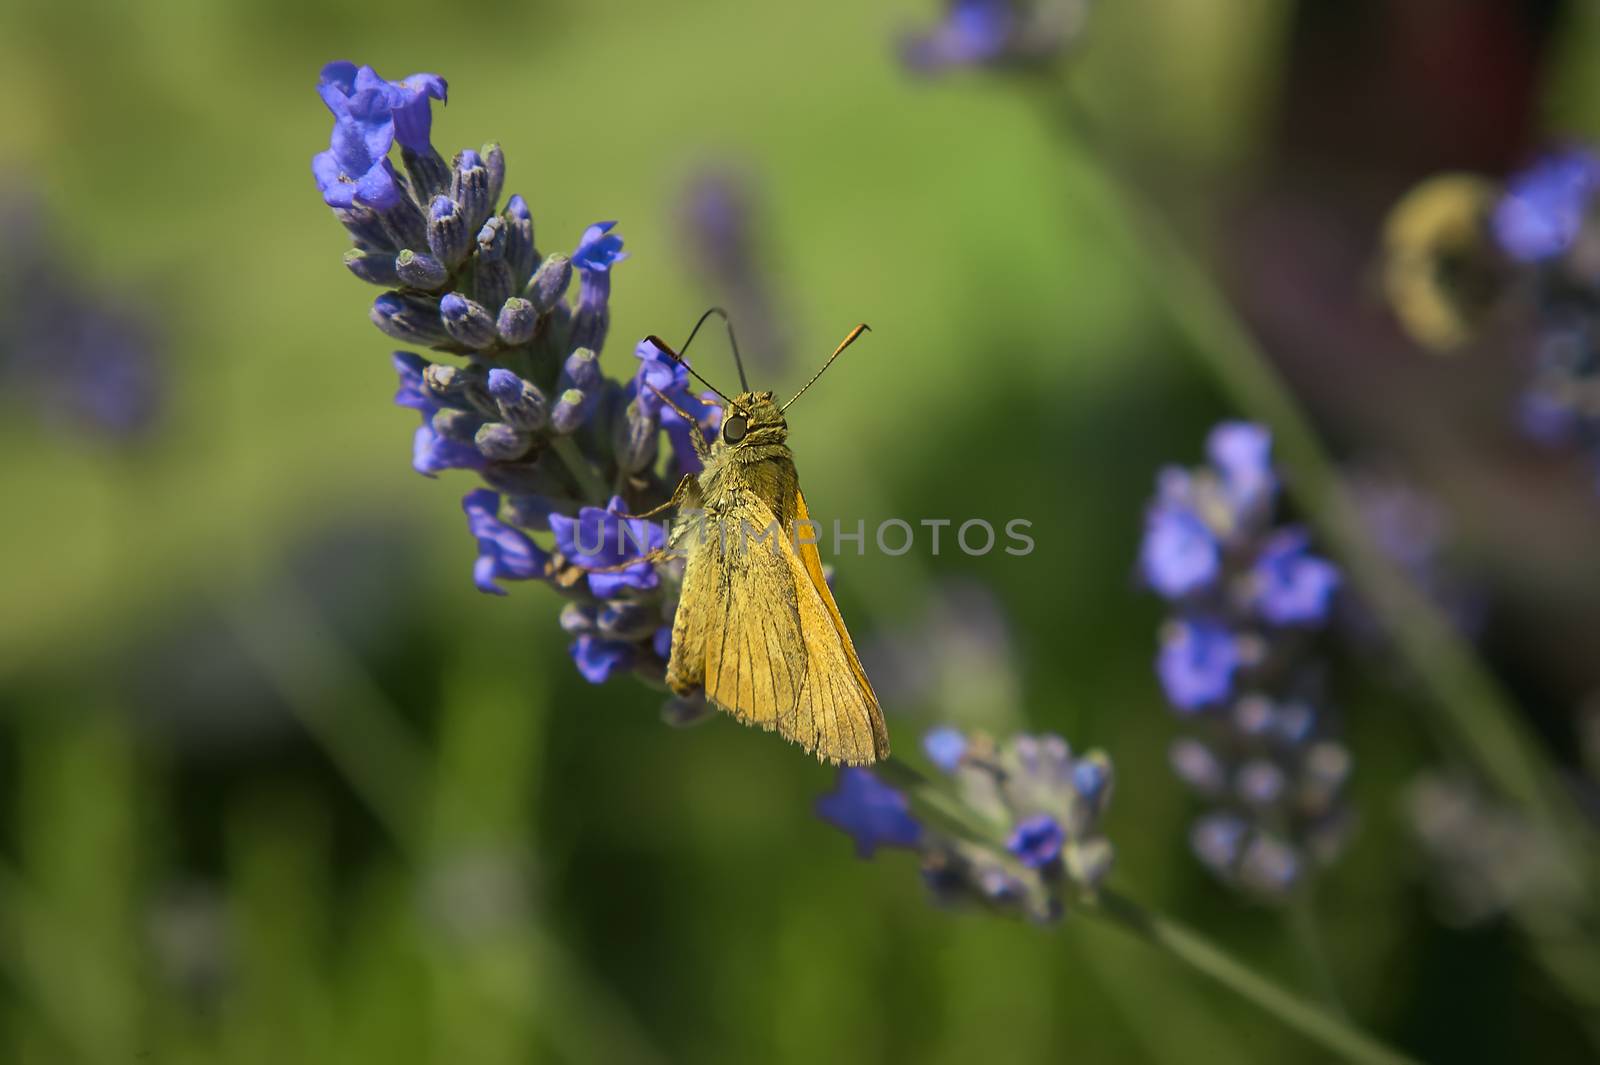 Small Moth resting on lavender flower shooting in a macro shot with surprising details.